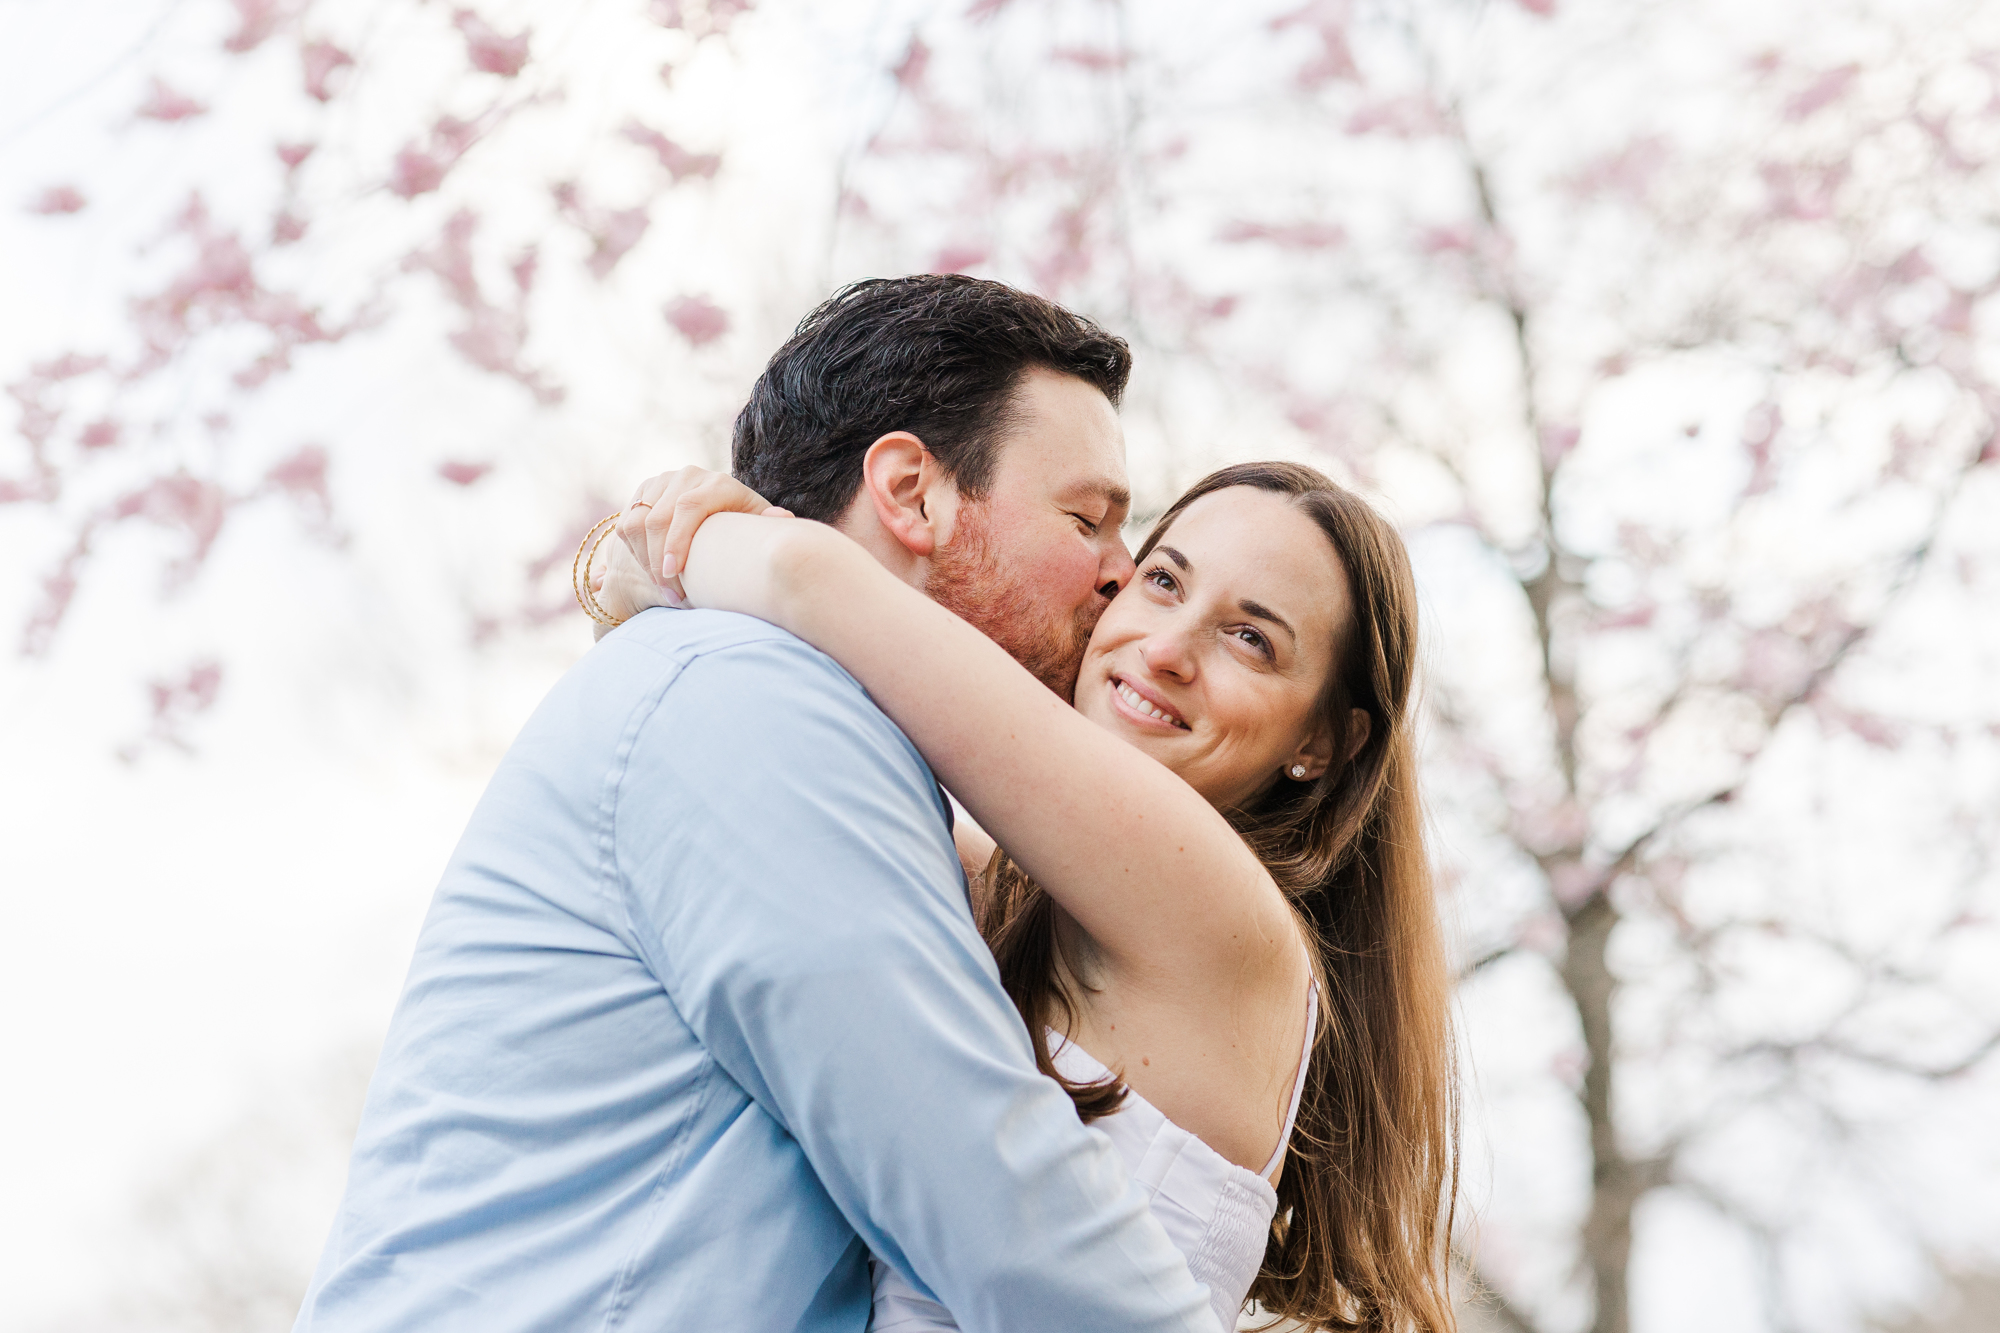 Special Boathouse Engagement Photos In Prospect Park